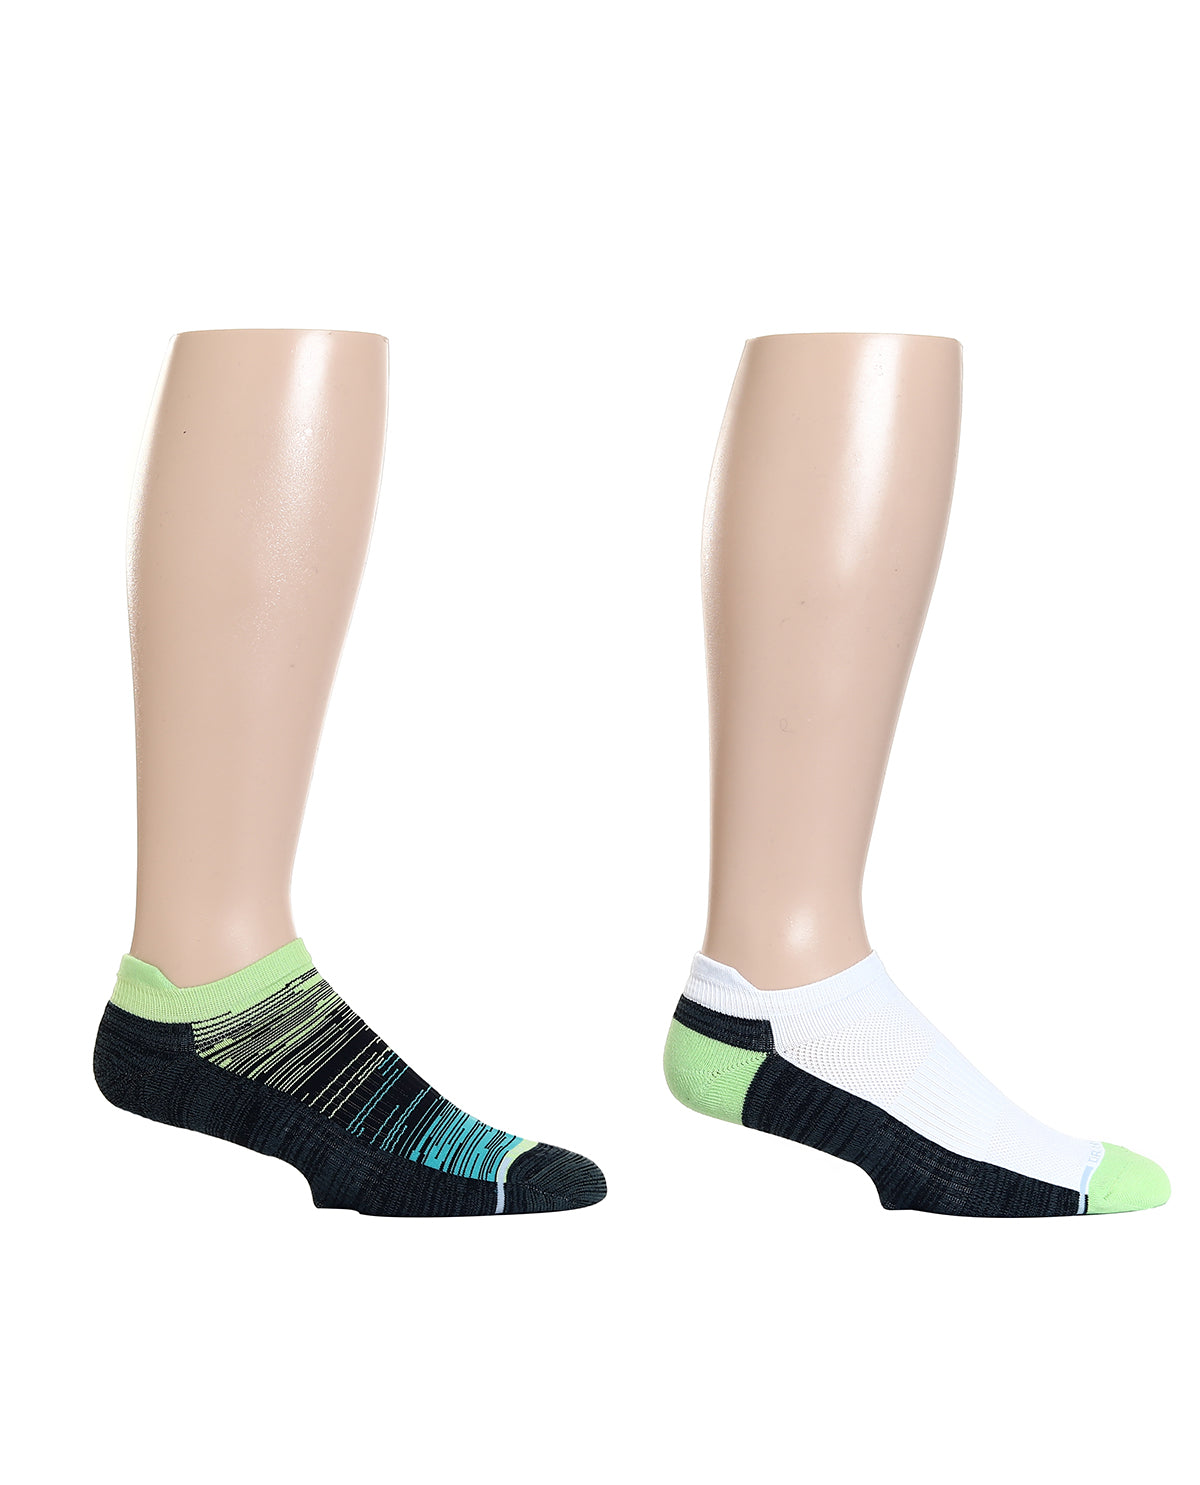 Dr. Motion Men's Ombre Ankle Compression Socks - Two Pack